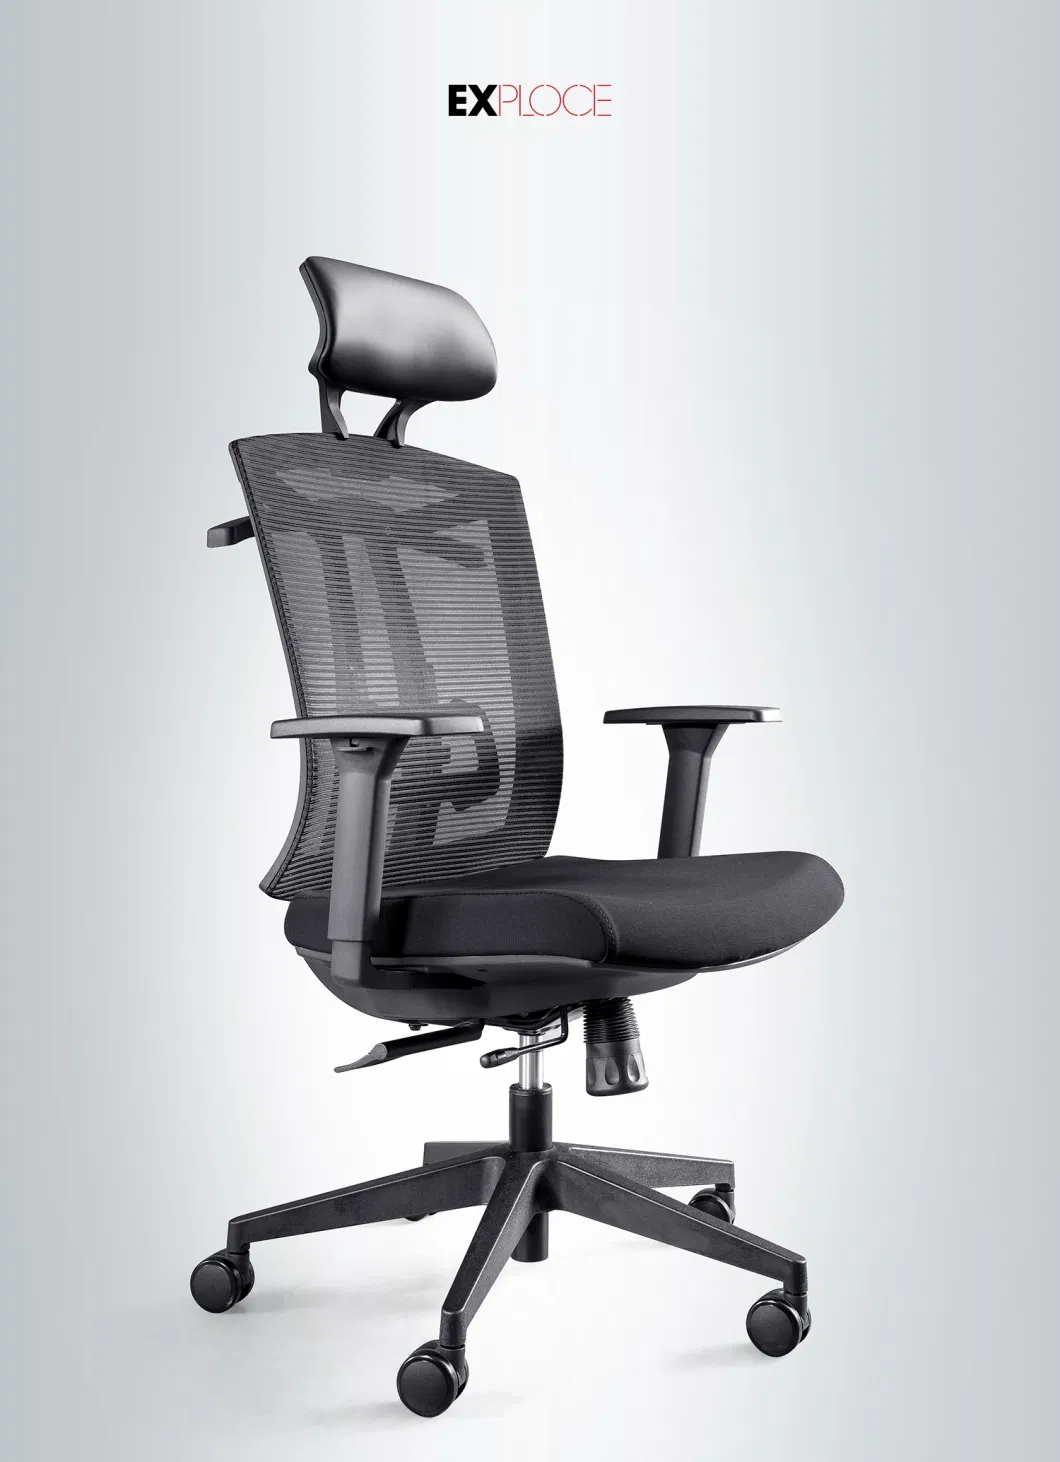 High Back Adjustable Revolving Manager Executive White Swivel Lift Ergonomic Mesh Fabric Gaming Office Chair with Headrest